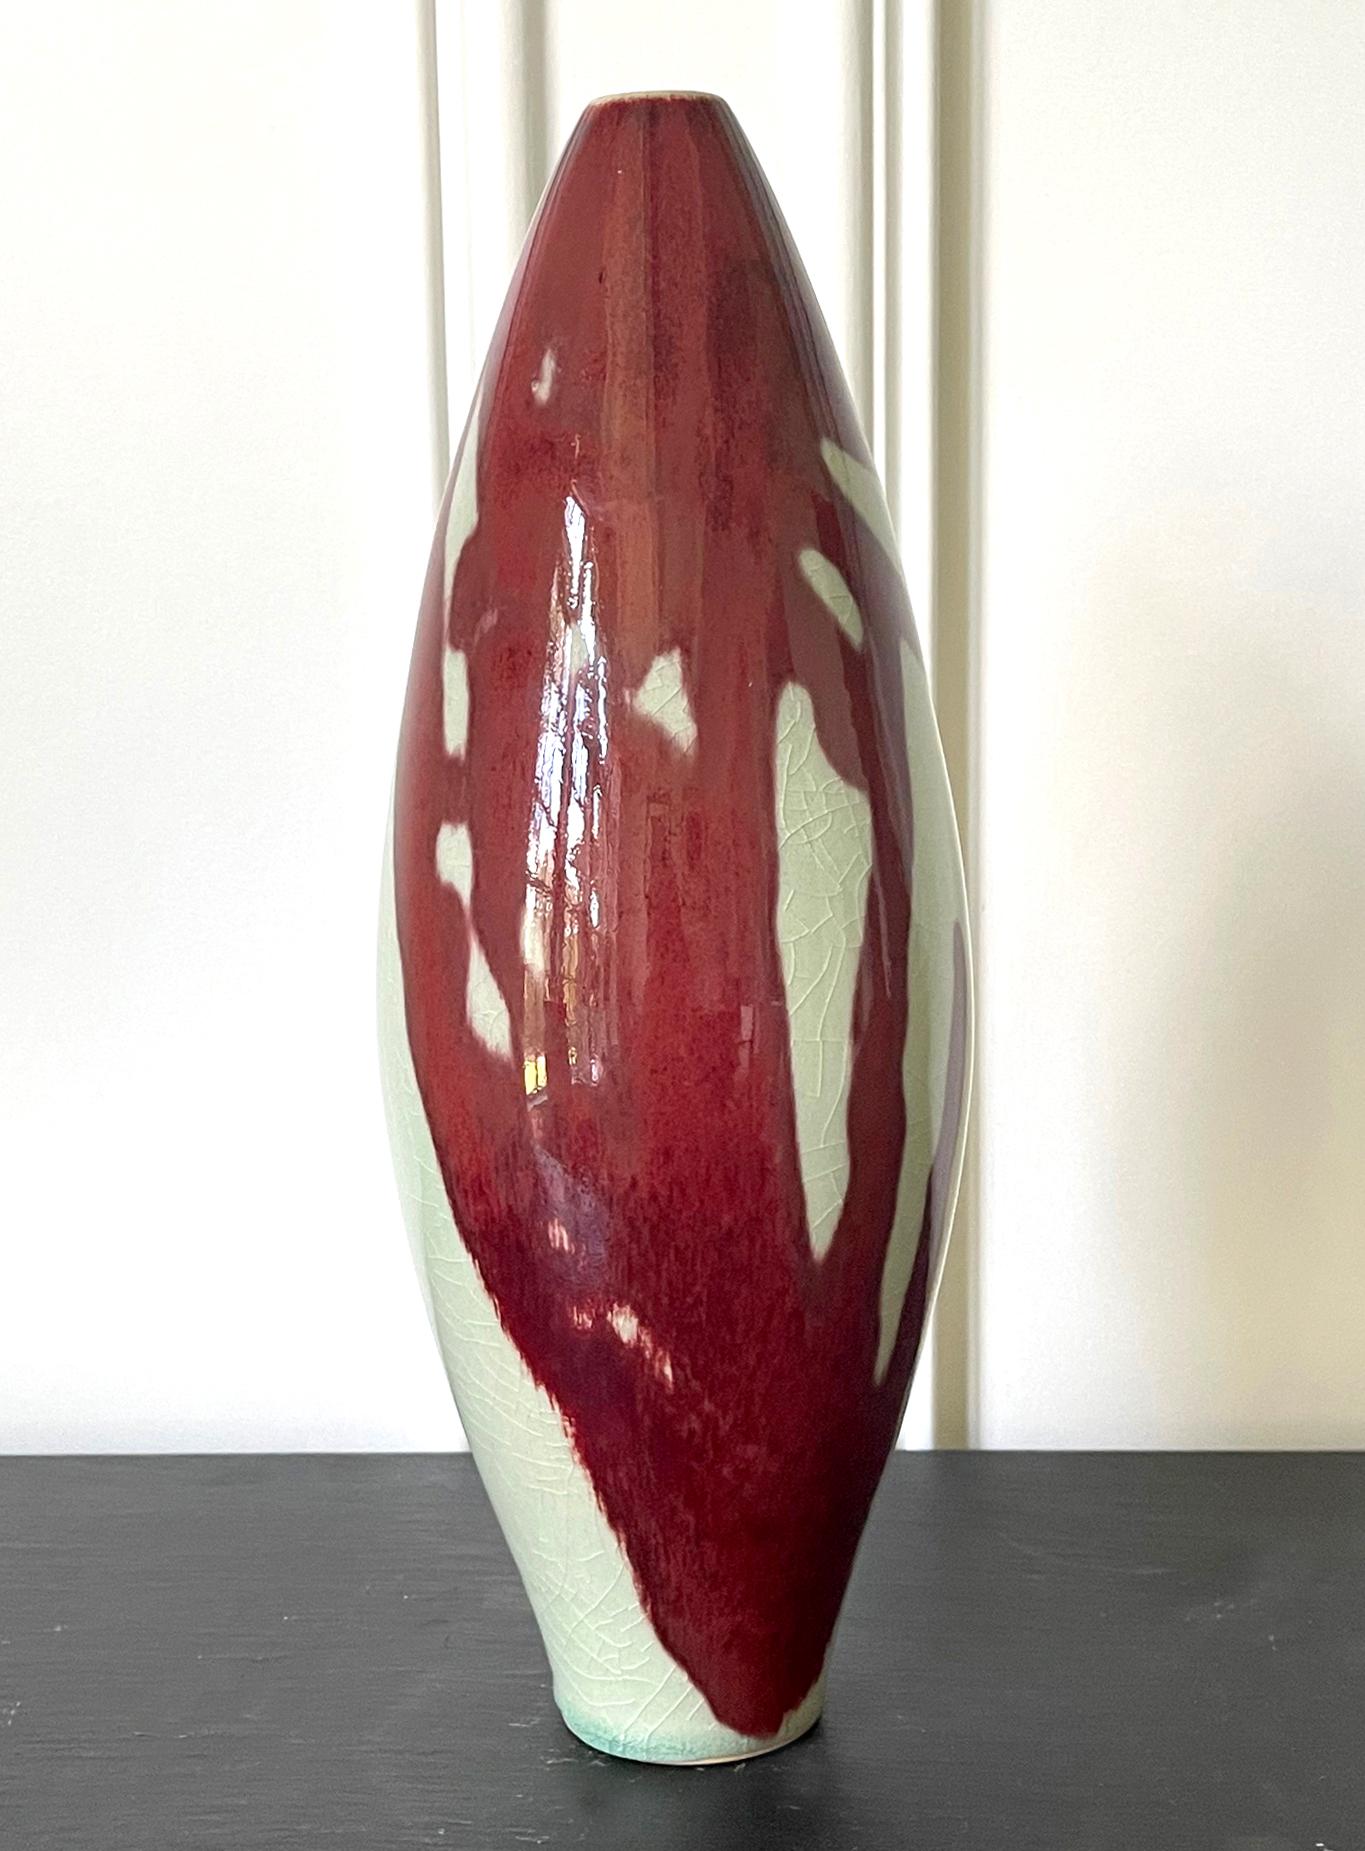 A spindle form porcelain vase by Brother Thomas Bezanson (1929-2007). As a modern interpretation of 